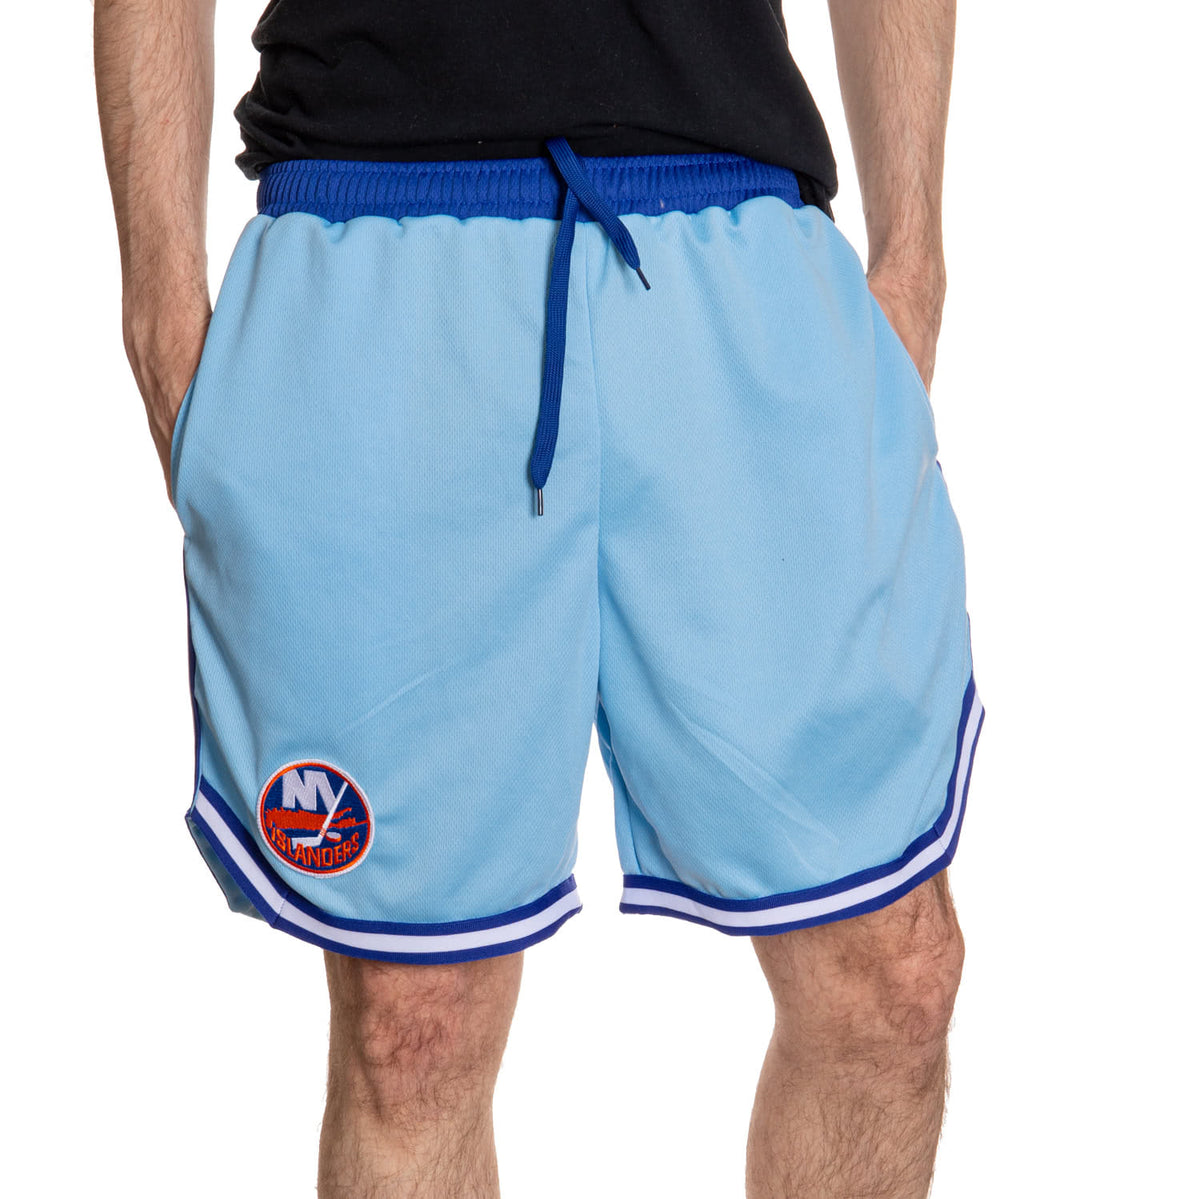 New York Islanders Men's 2 Tone Air Mesh Shorts Lined with Pockets